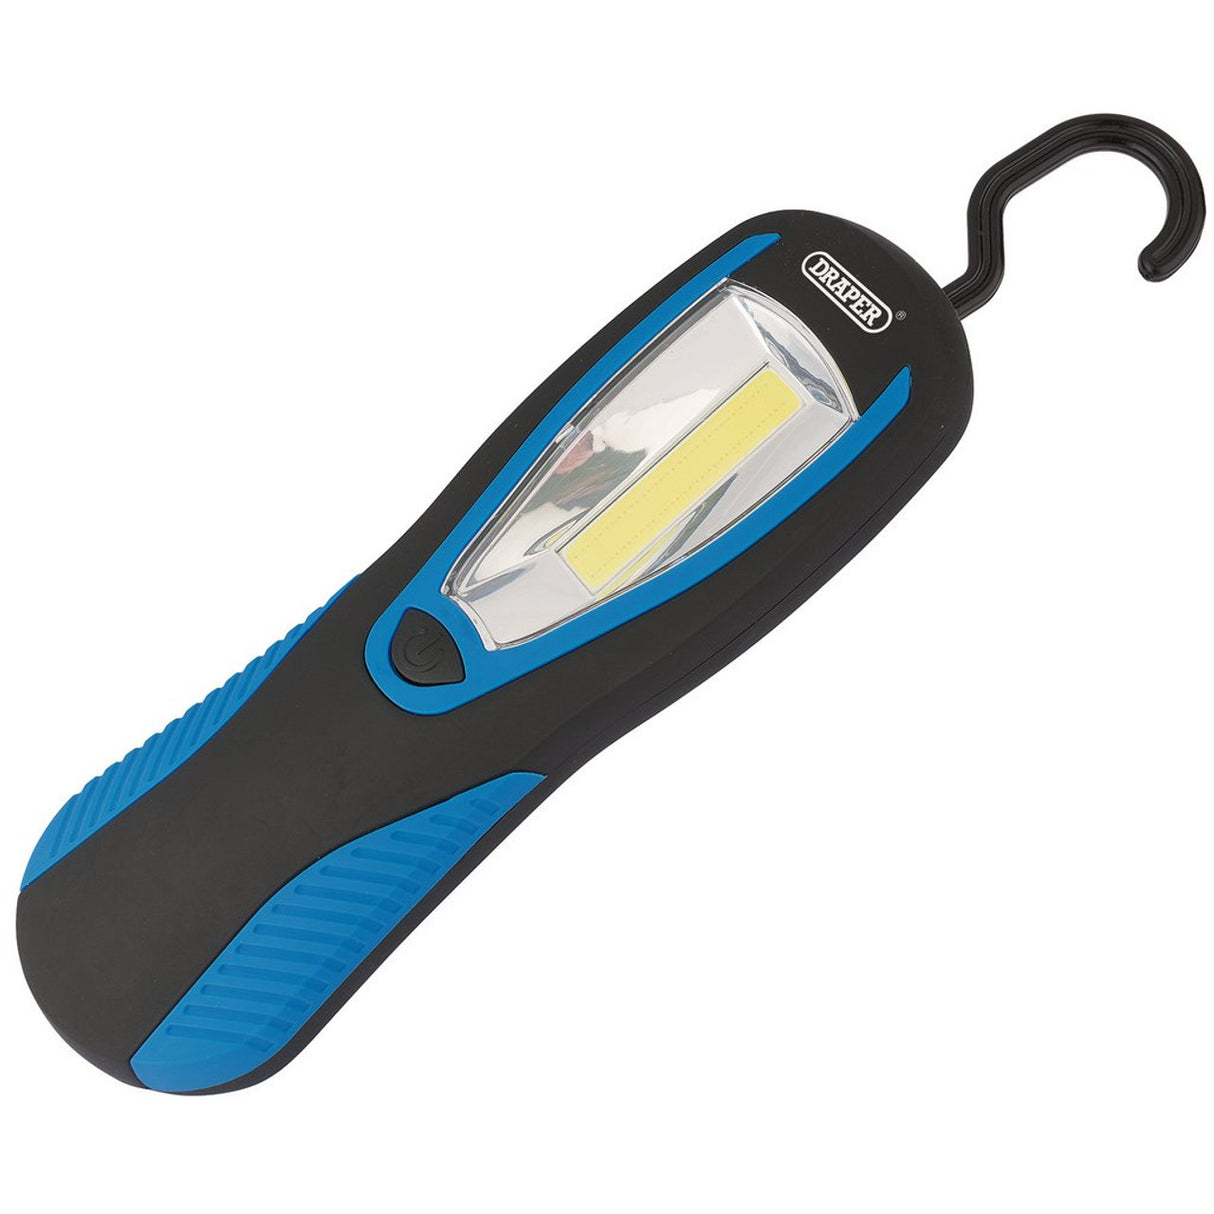 Draper Tools Cob Led Work Light With Magnetic Back And Hanging Hook, 3W, 200 Lumens, Blue, 3 x Aa Batteries Supplied